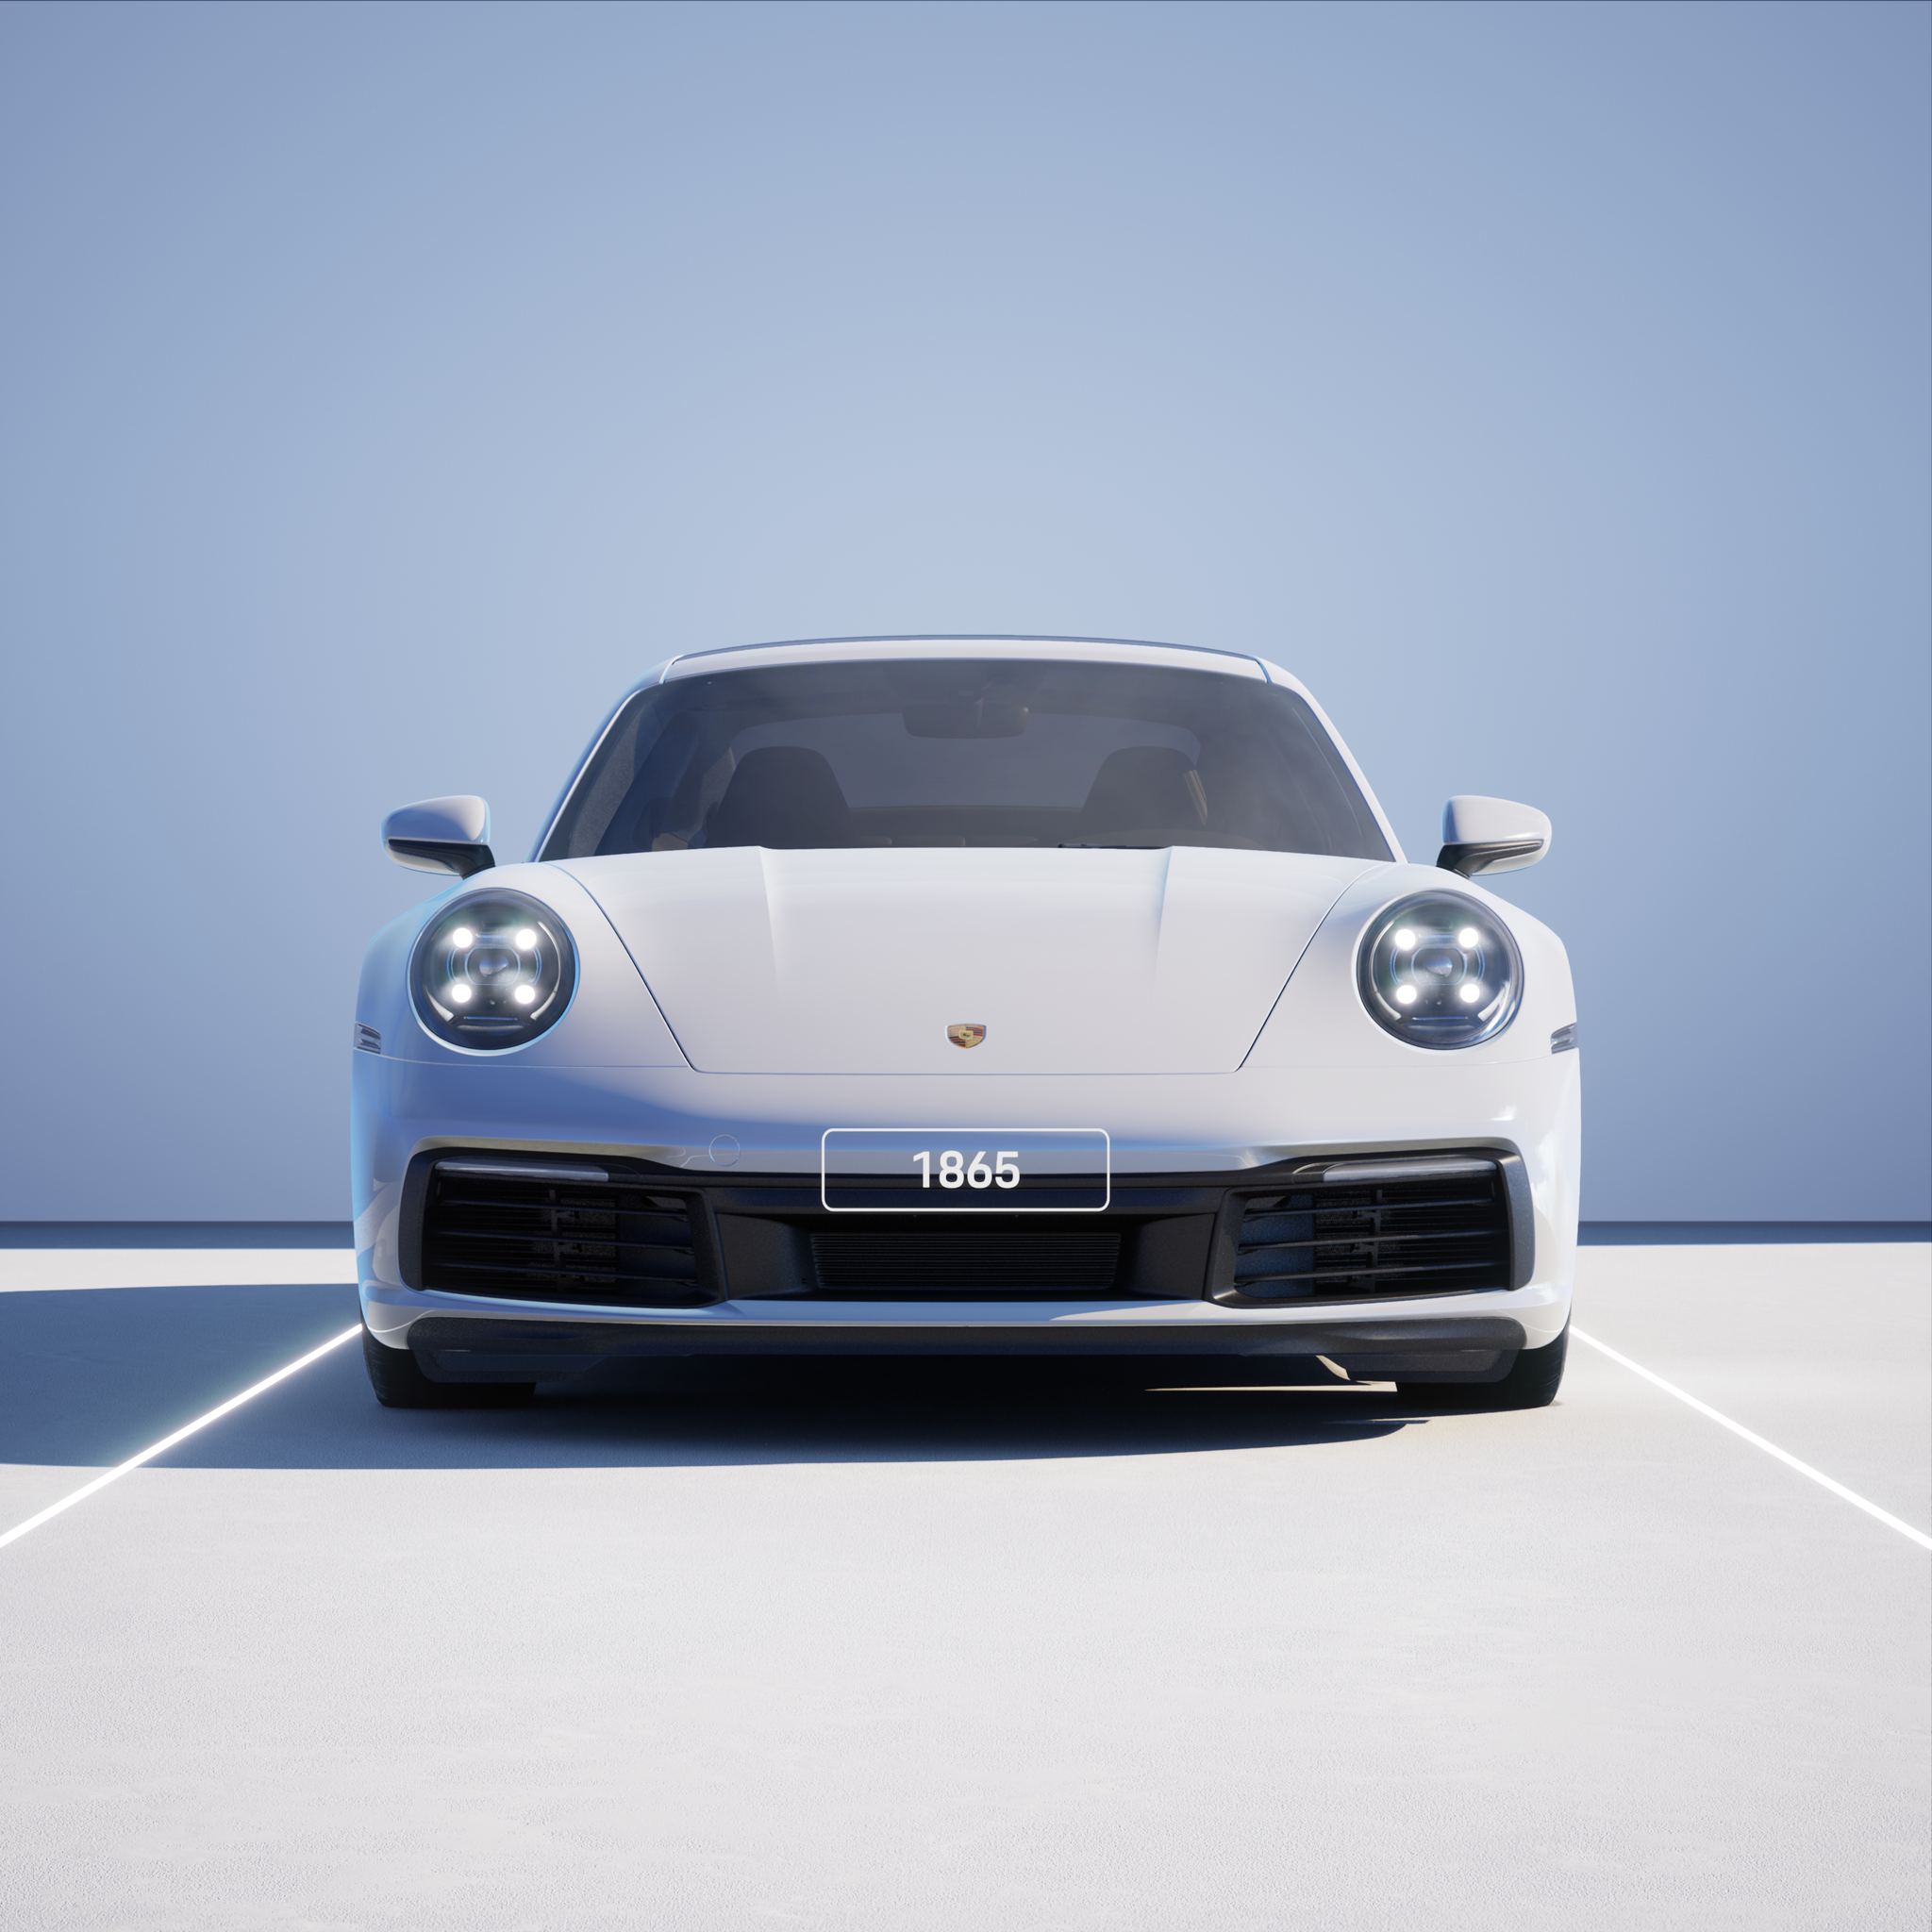 The PORSCHΞ 911 1865 image in phase